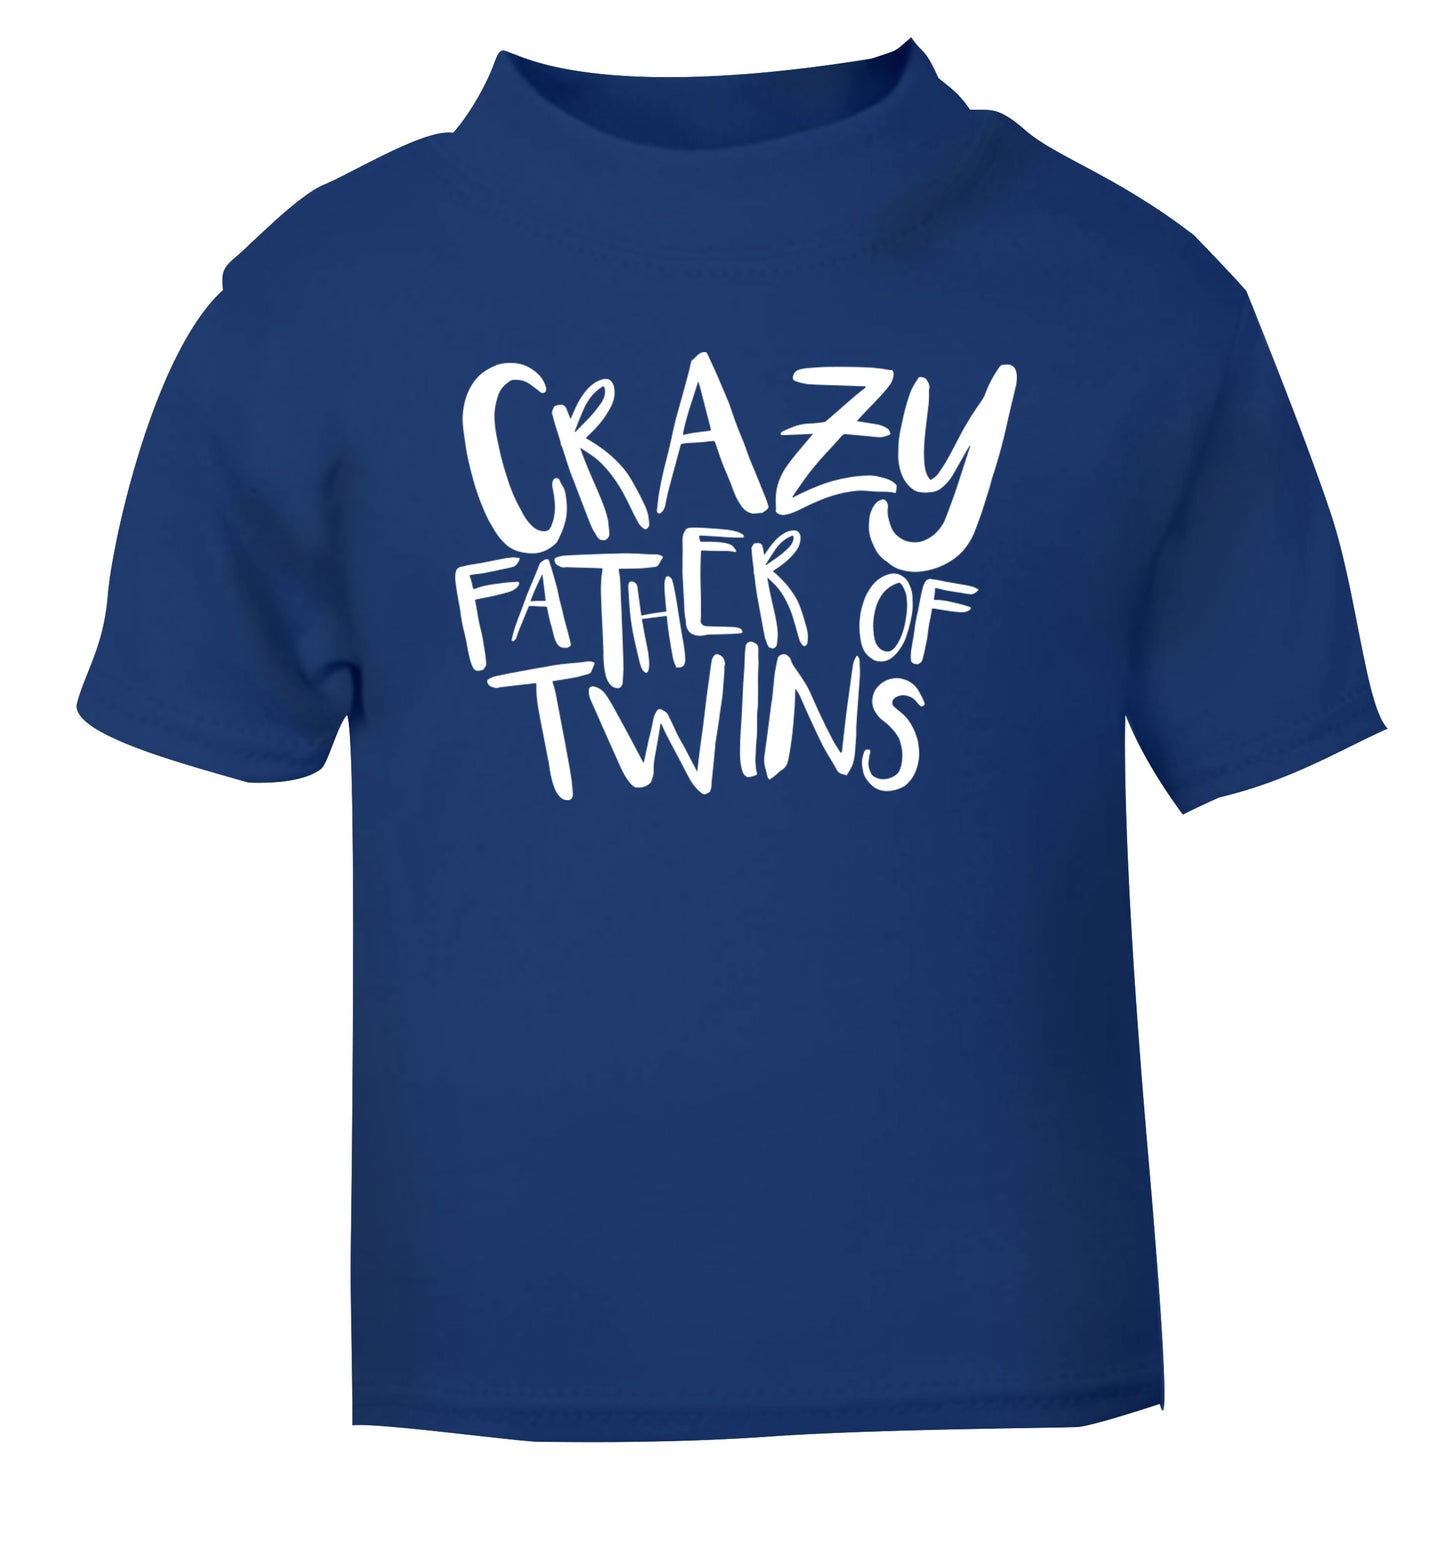 Crazy father of twins blue Baby Toddler Tshirt 2 Years